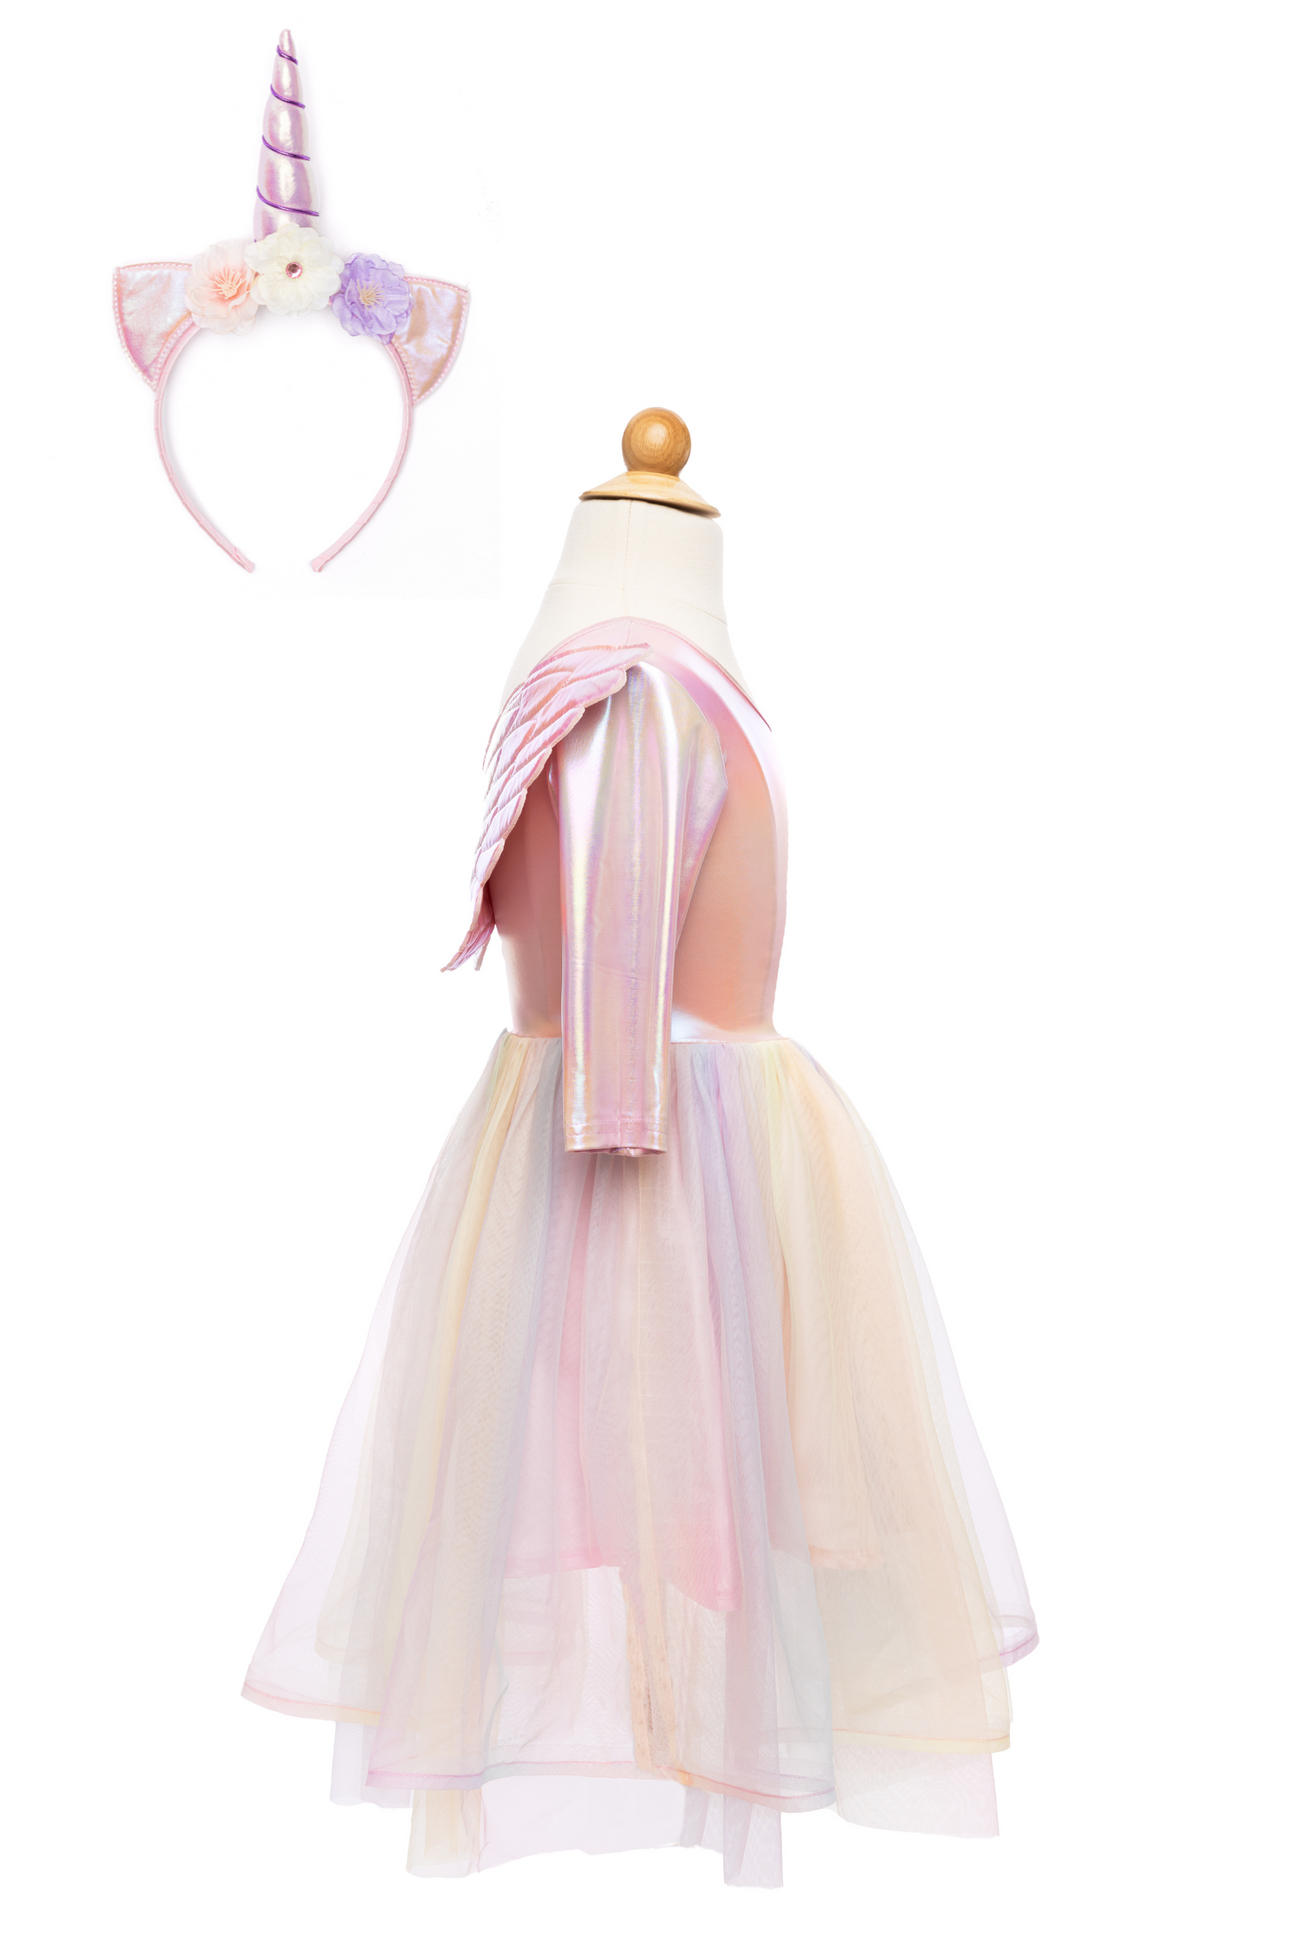 Alicorn Dress with Wings and Headband Set